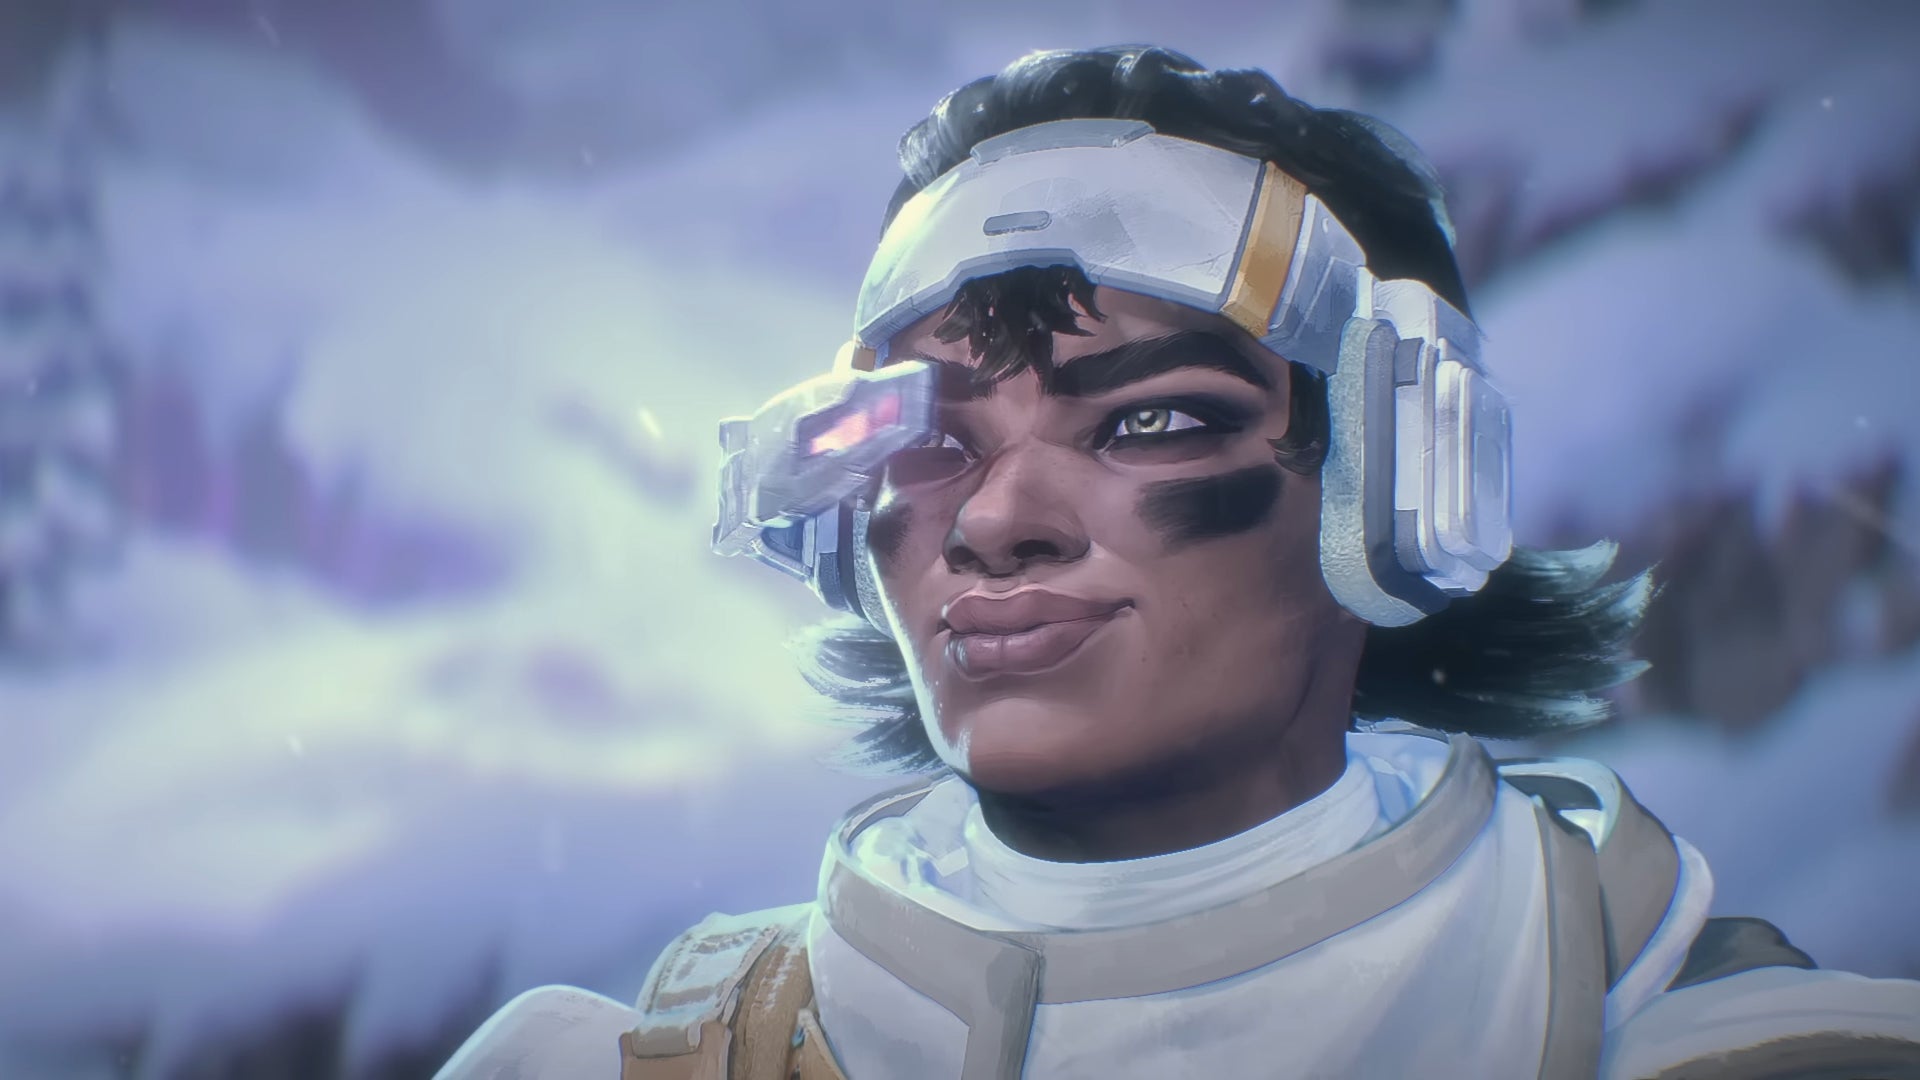 Vantage uses her eyepiece to look off into the distance in Apex Legends.